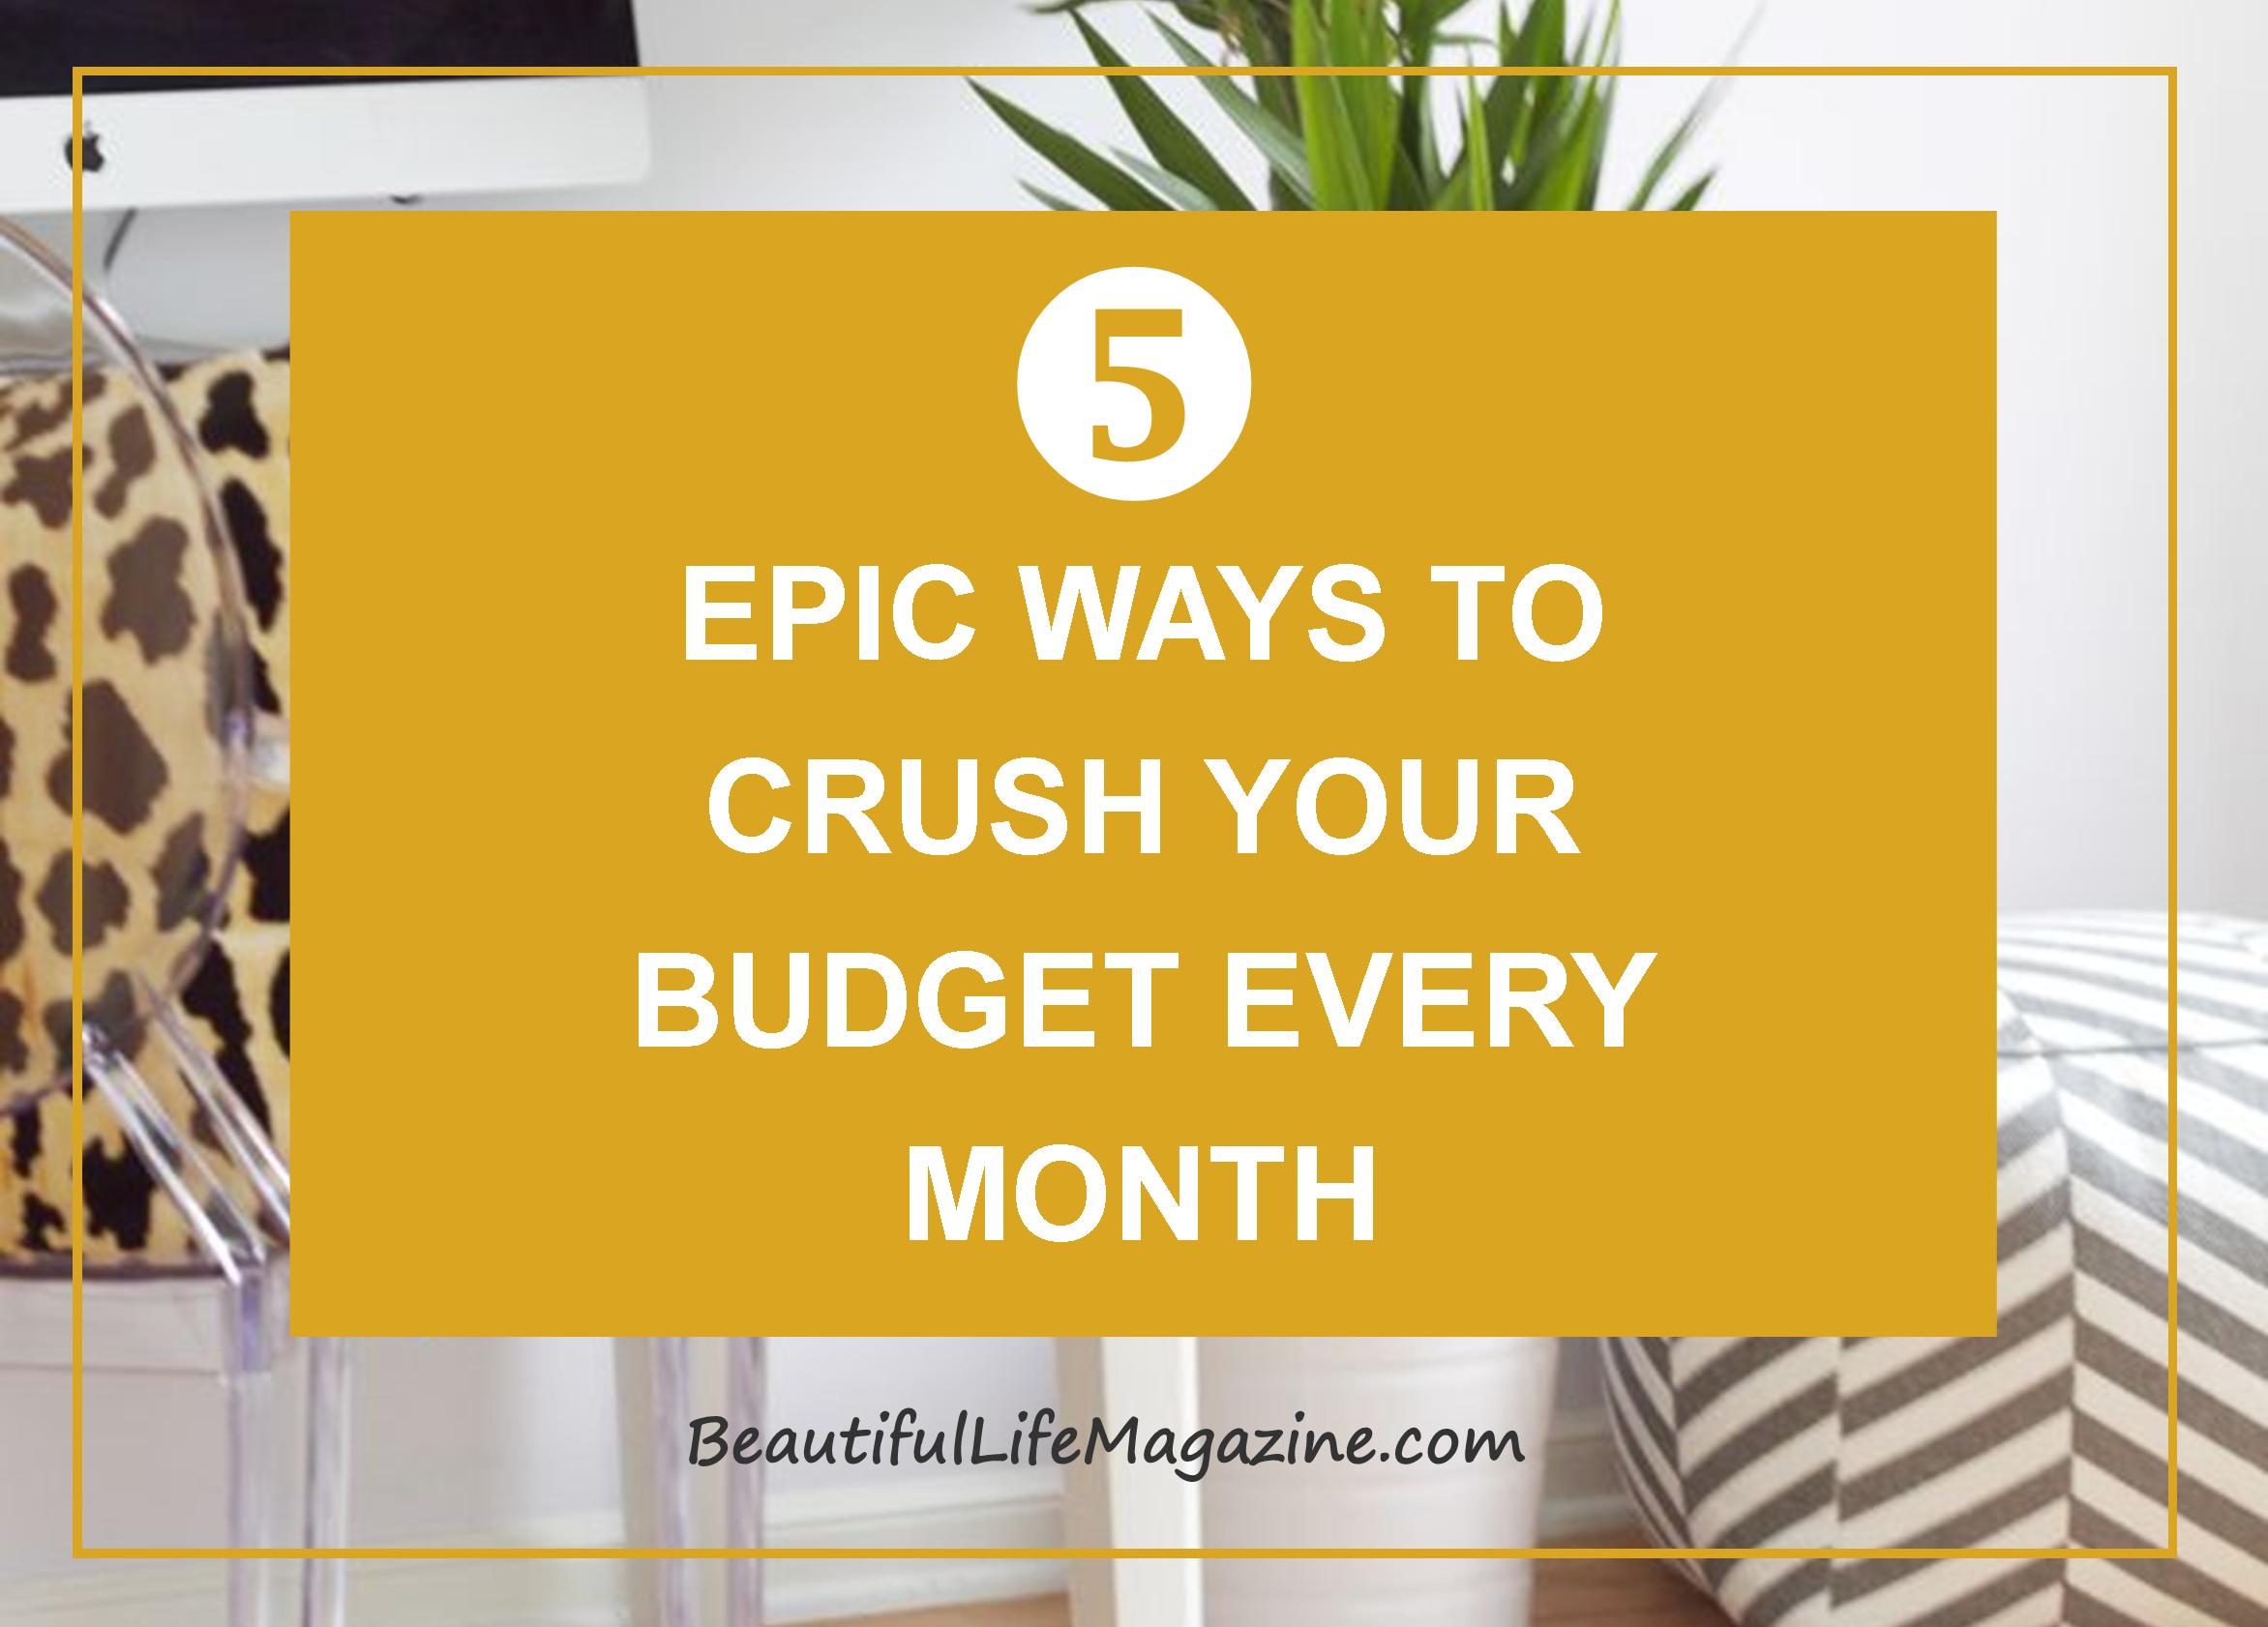 It’s easy to get discouraged if things don’t go exactly as planned. These few simple tips will help keep your head up and your crush your budget.